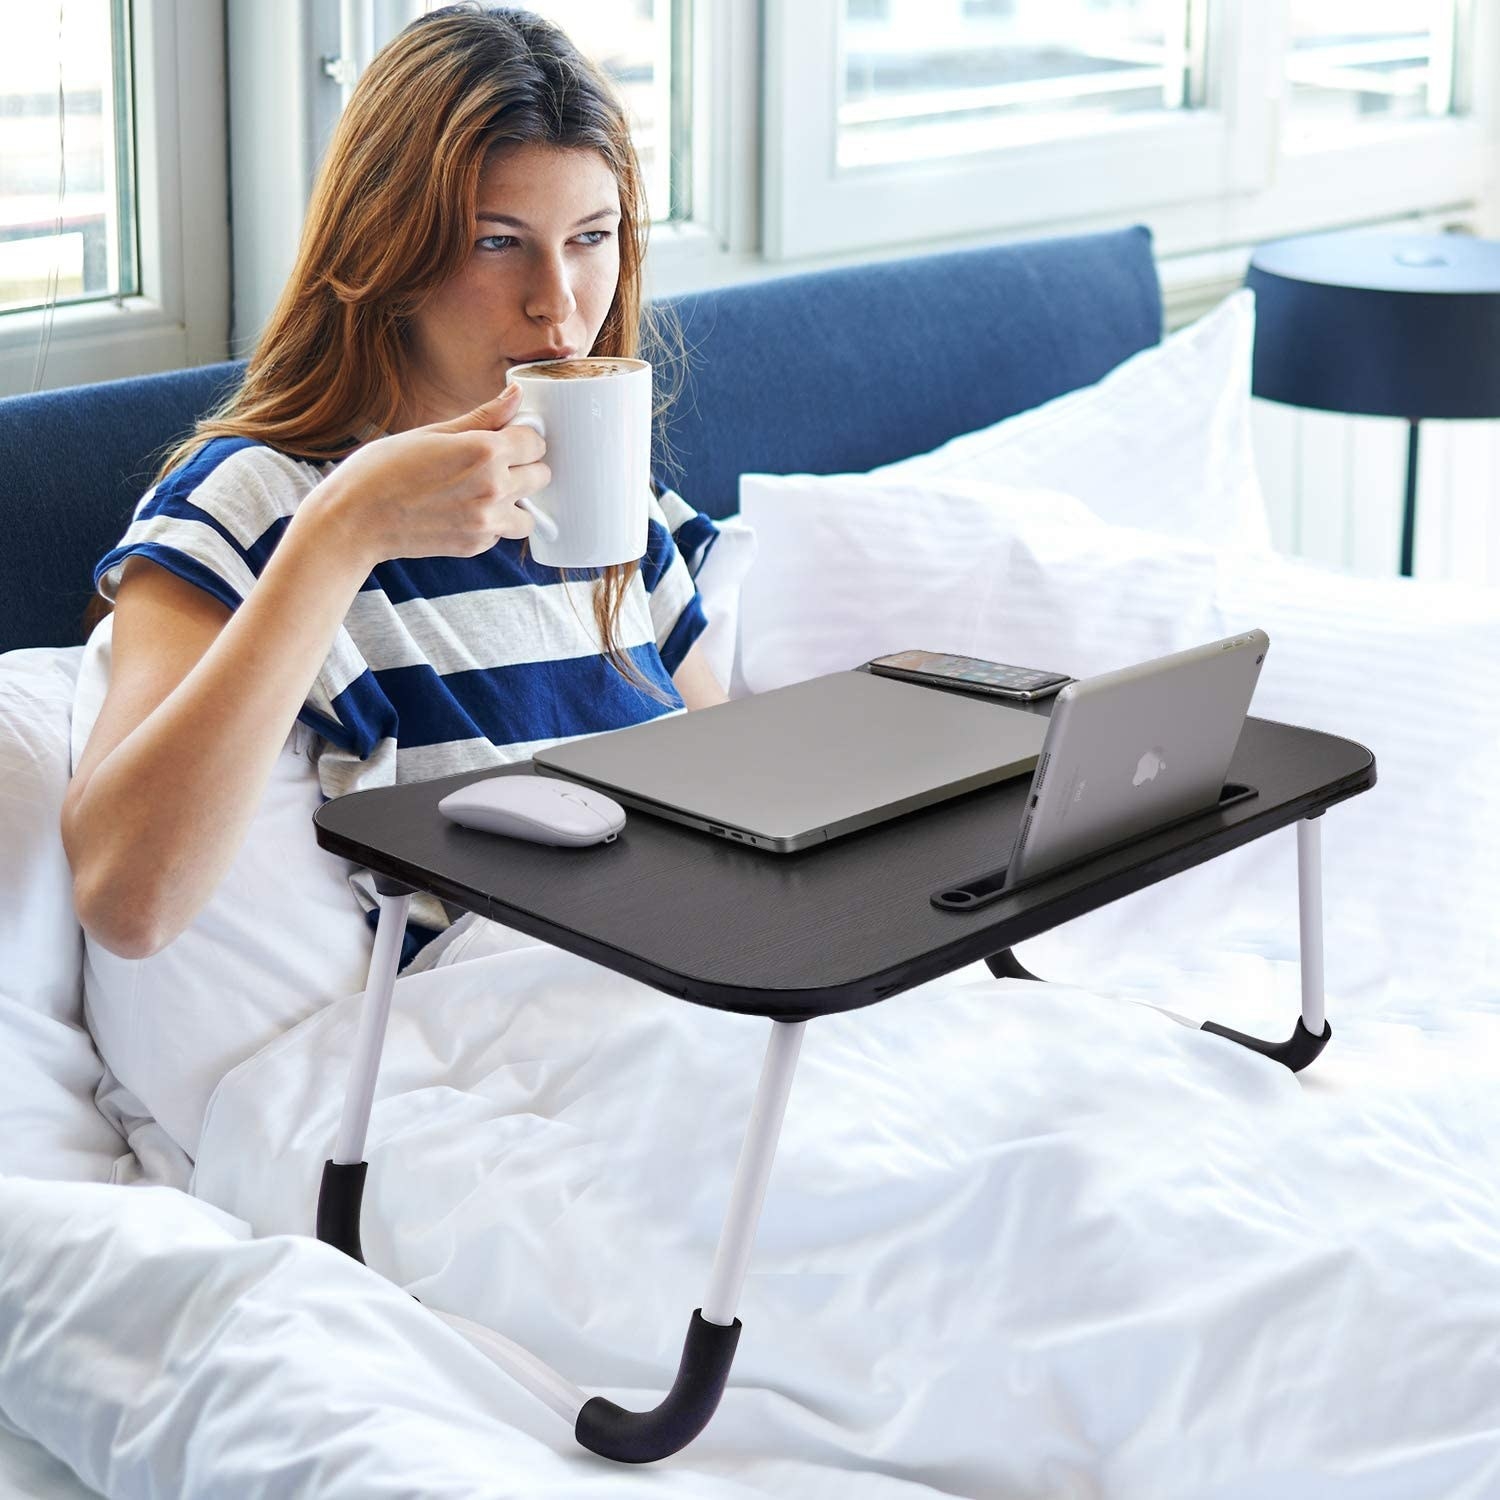 A woman sitting on a bed with the laptop desk.